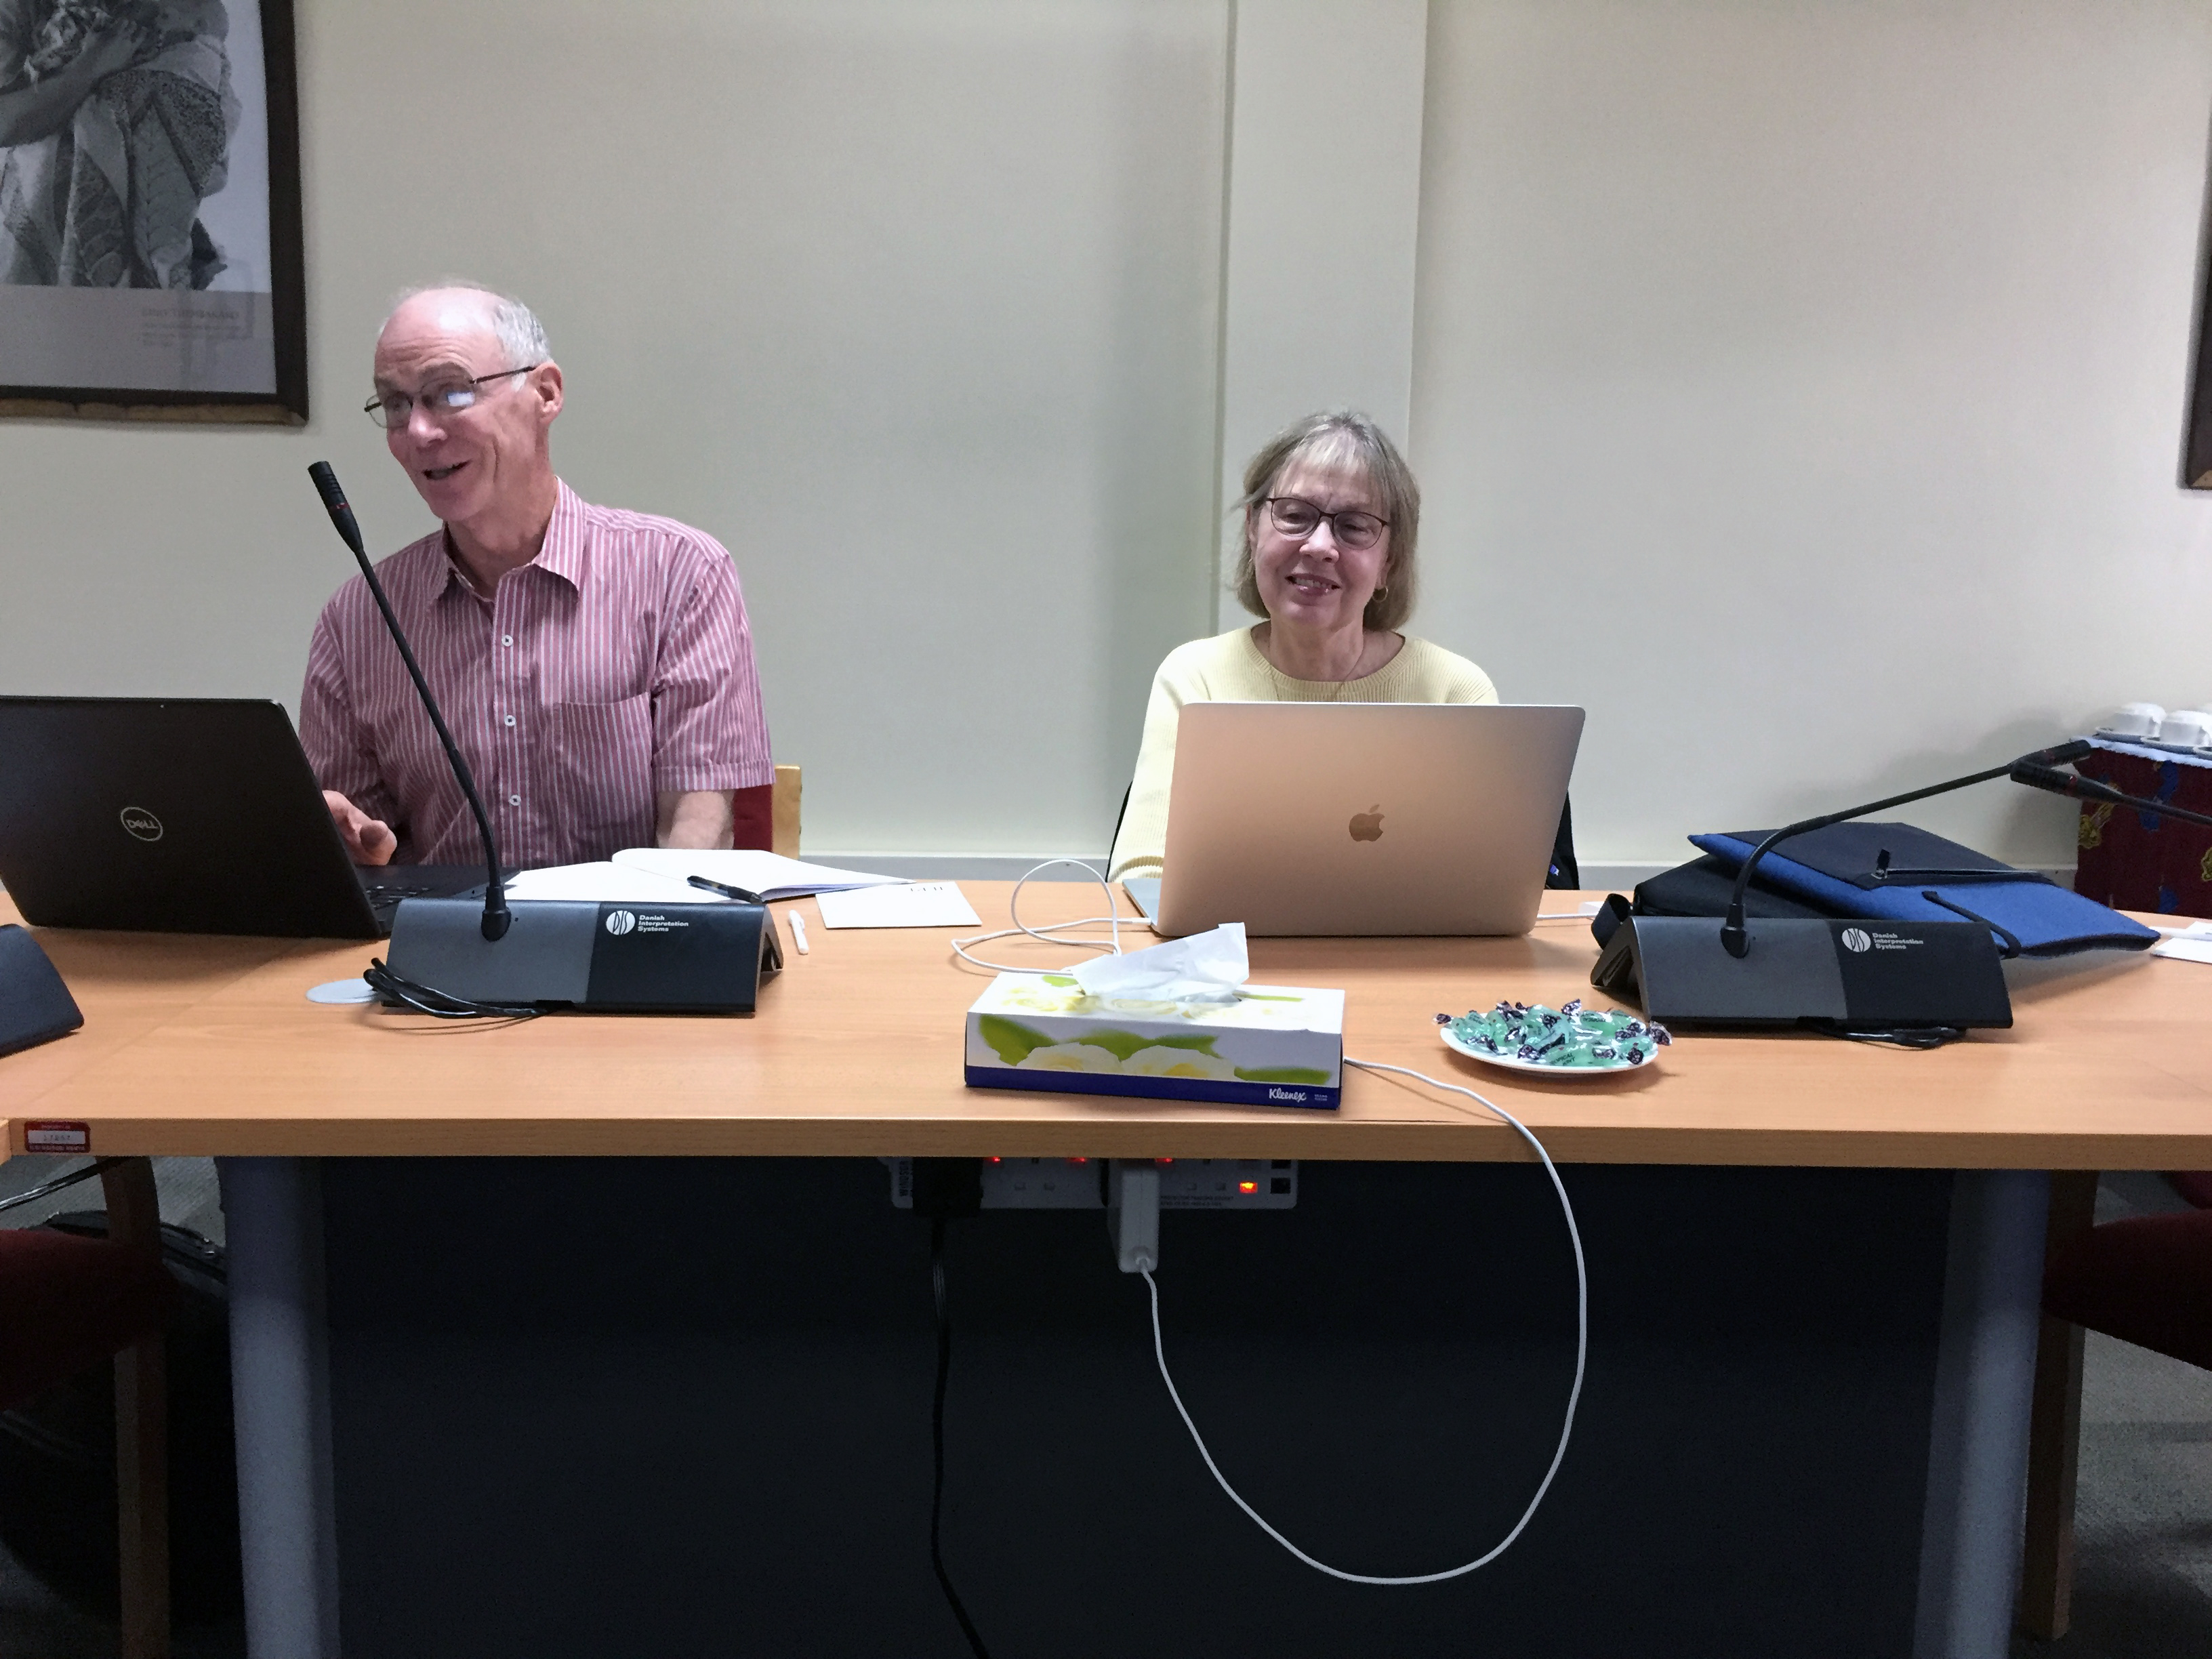 Dr. George Kennedy and Dr. Linda Hanley-Bowdoin leading the project meeting as Co-Principal investigators.